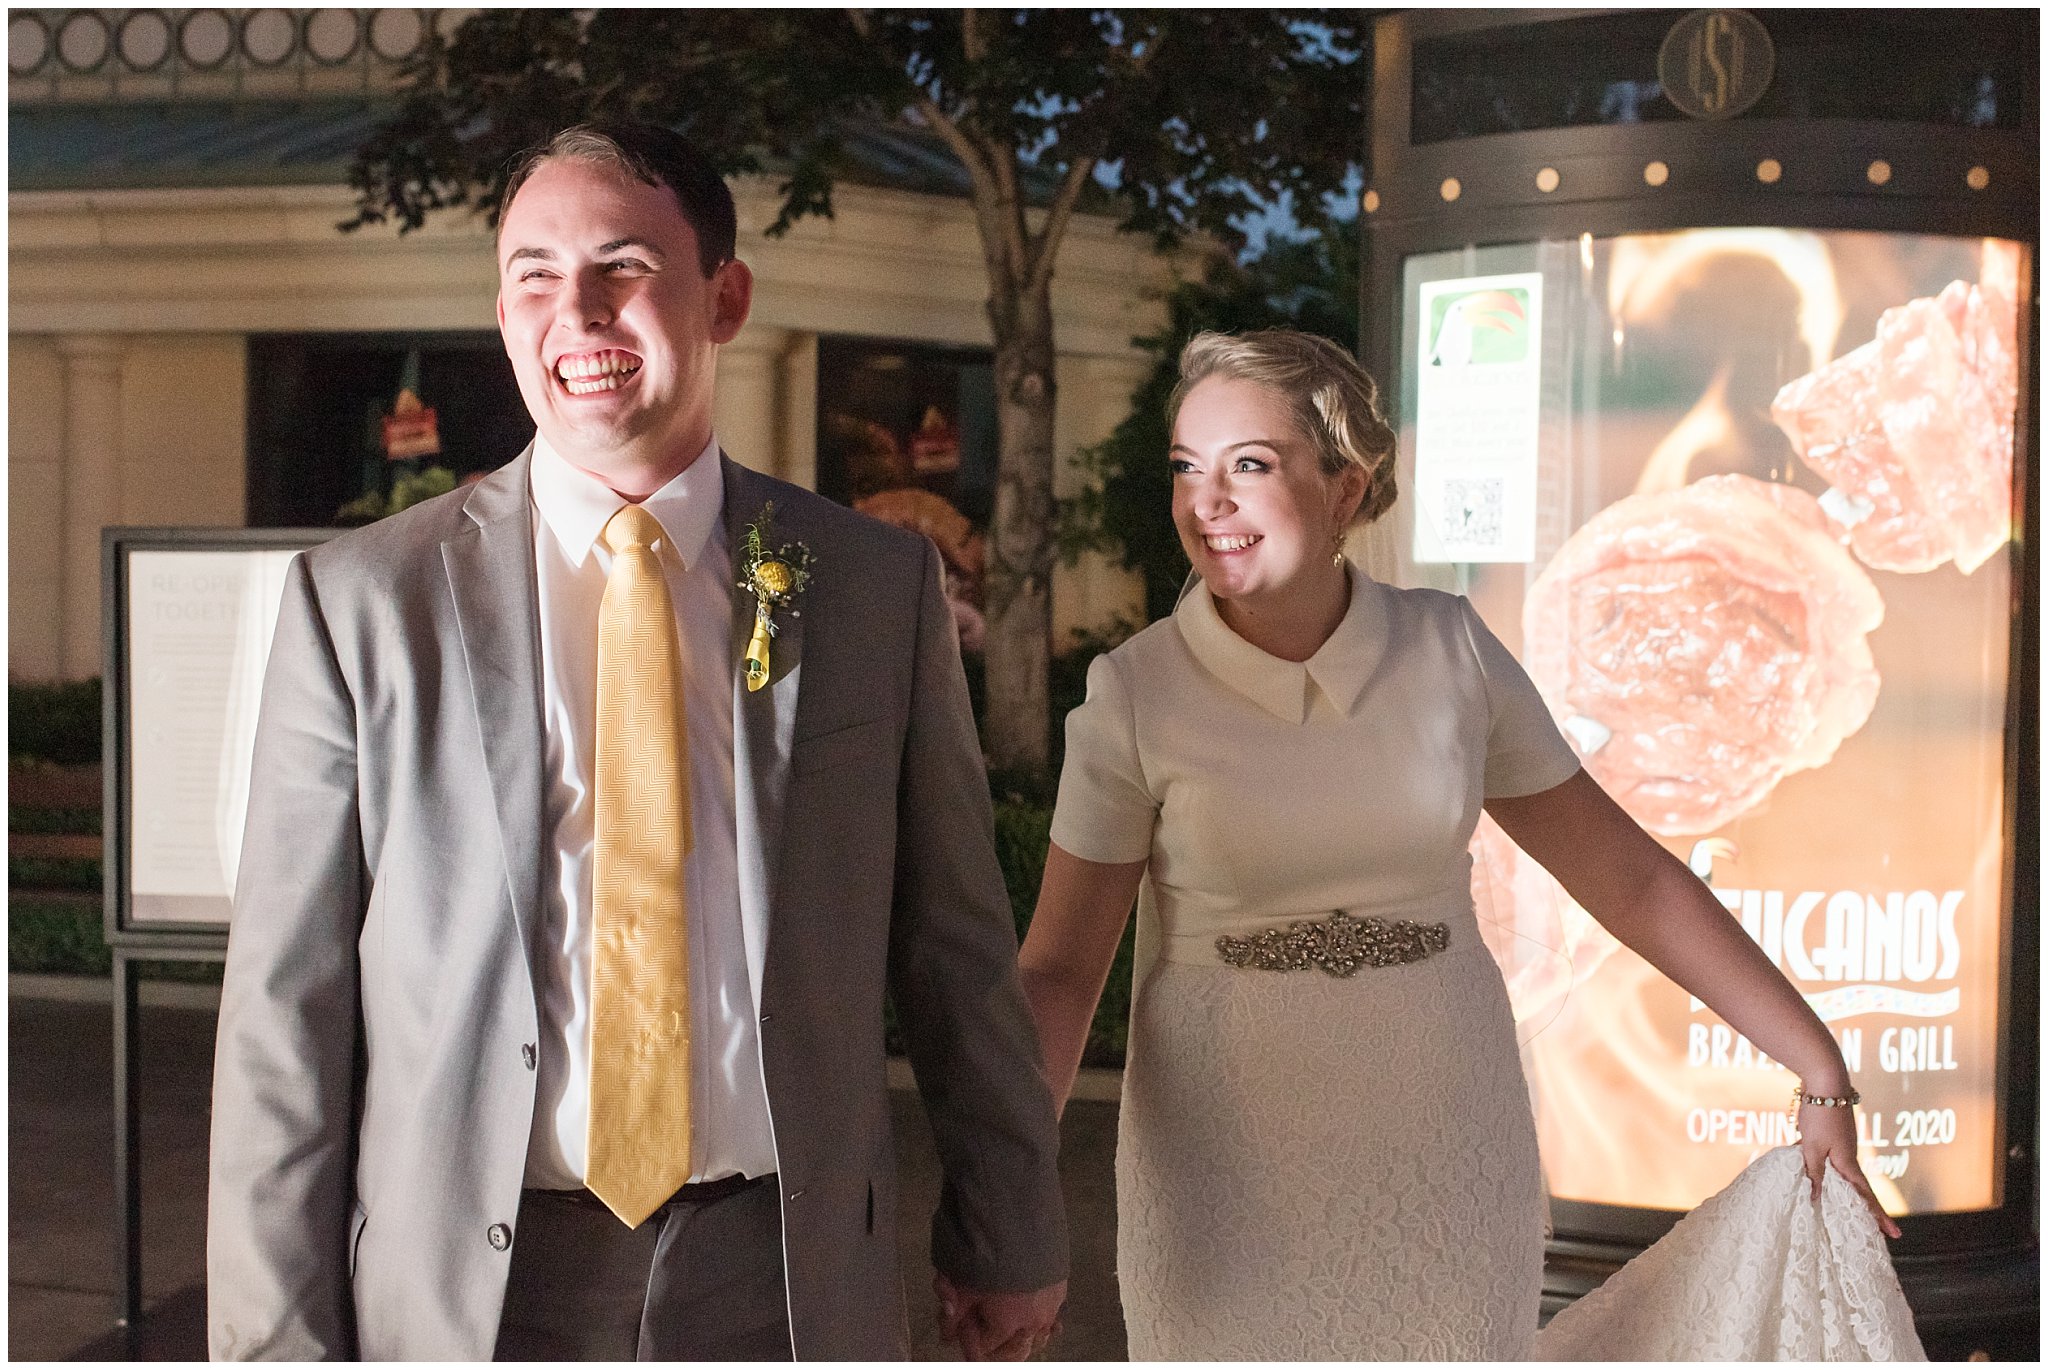 Classic Car bride and groom portraits at night at Fountain View Event Venue at Station Park | Fountain View Event Venue and Bountiful Temple Wedding | Jessie and Dallin Photography